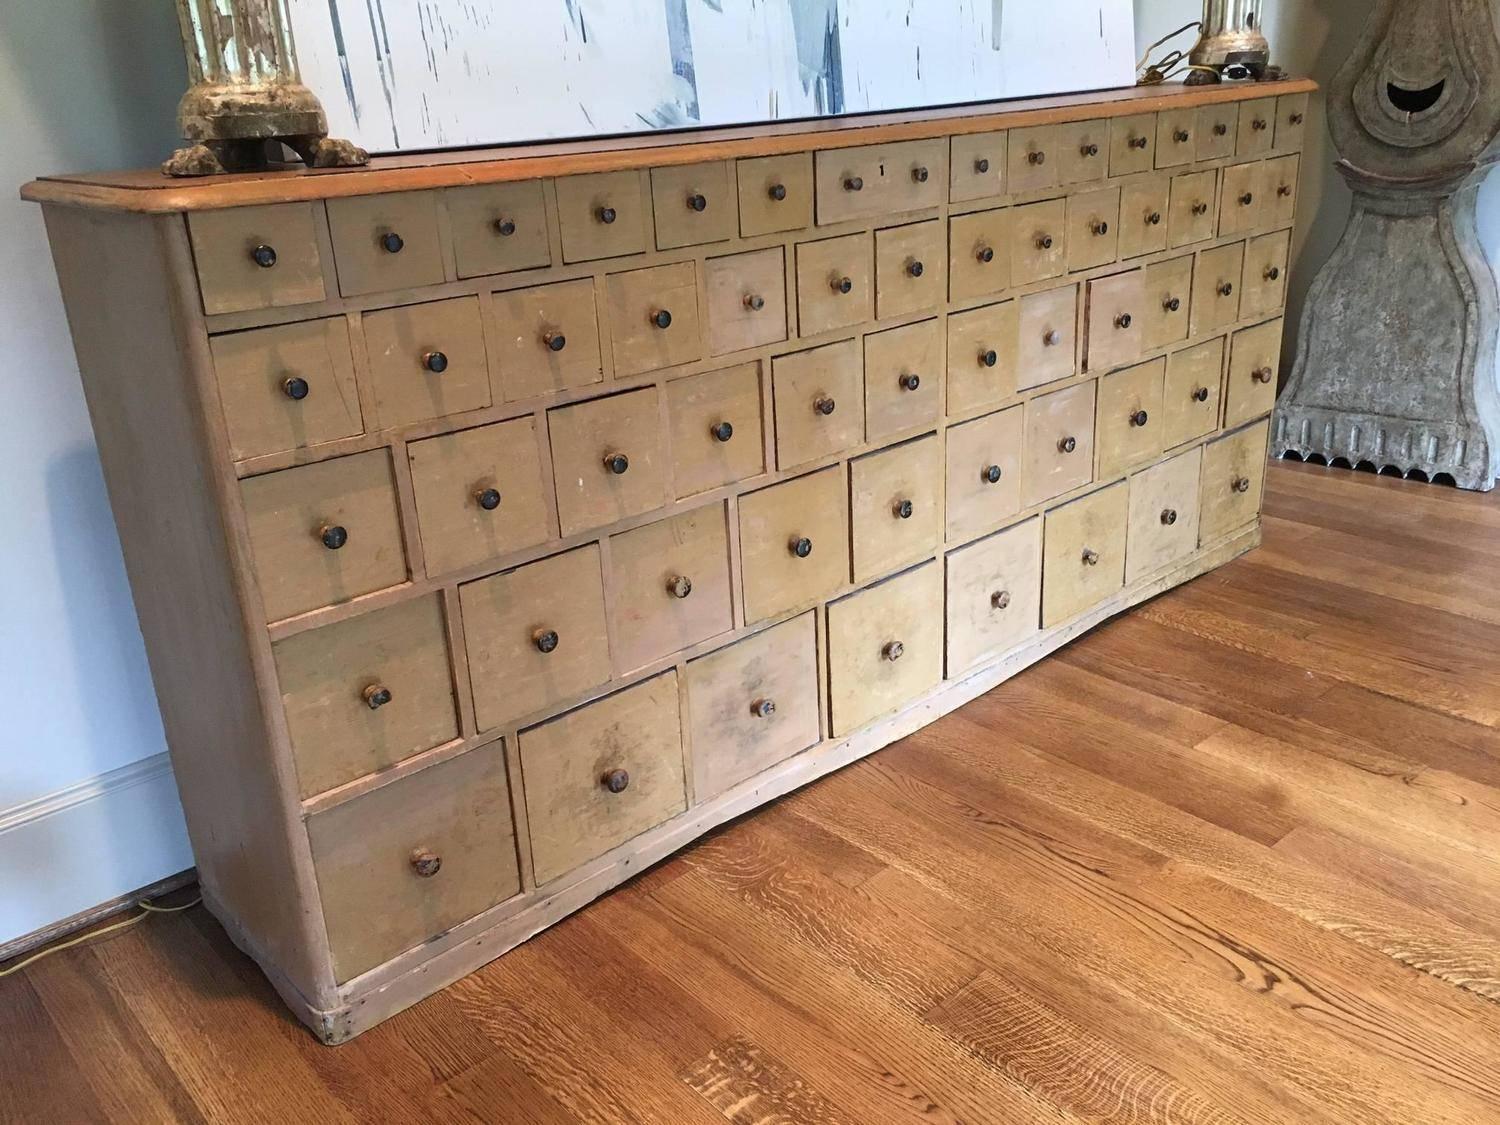 A handsome and well proportioned Swedish apothecary bank of drawers. 16 smaller upper drawers descending five levels to end in eight larger drawers at bottom. In an original pale ochre paint. The bottom skit being cut in two elongated 